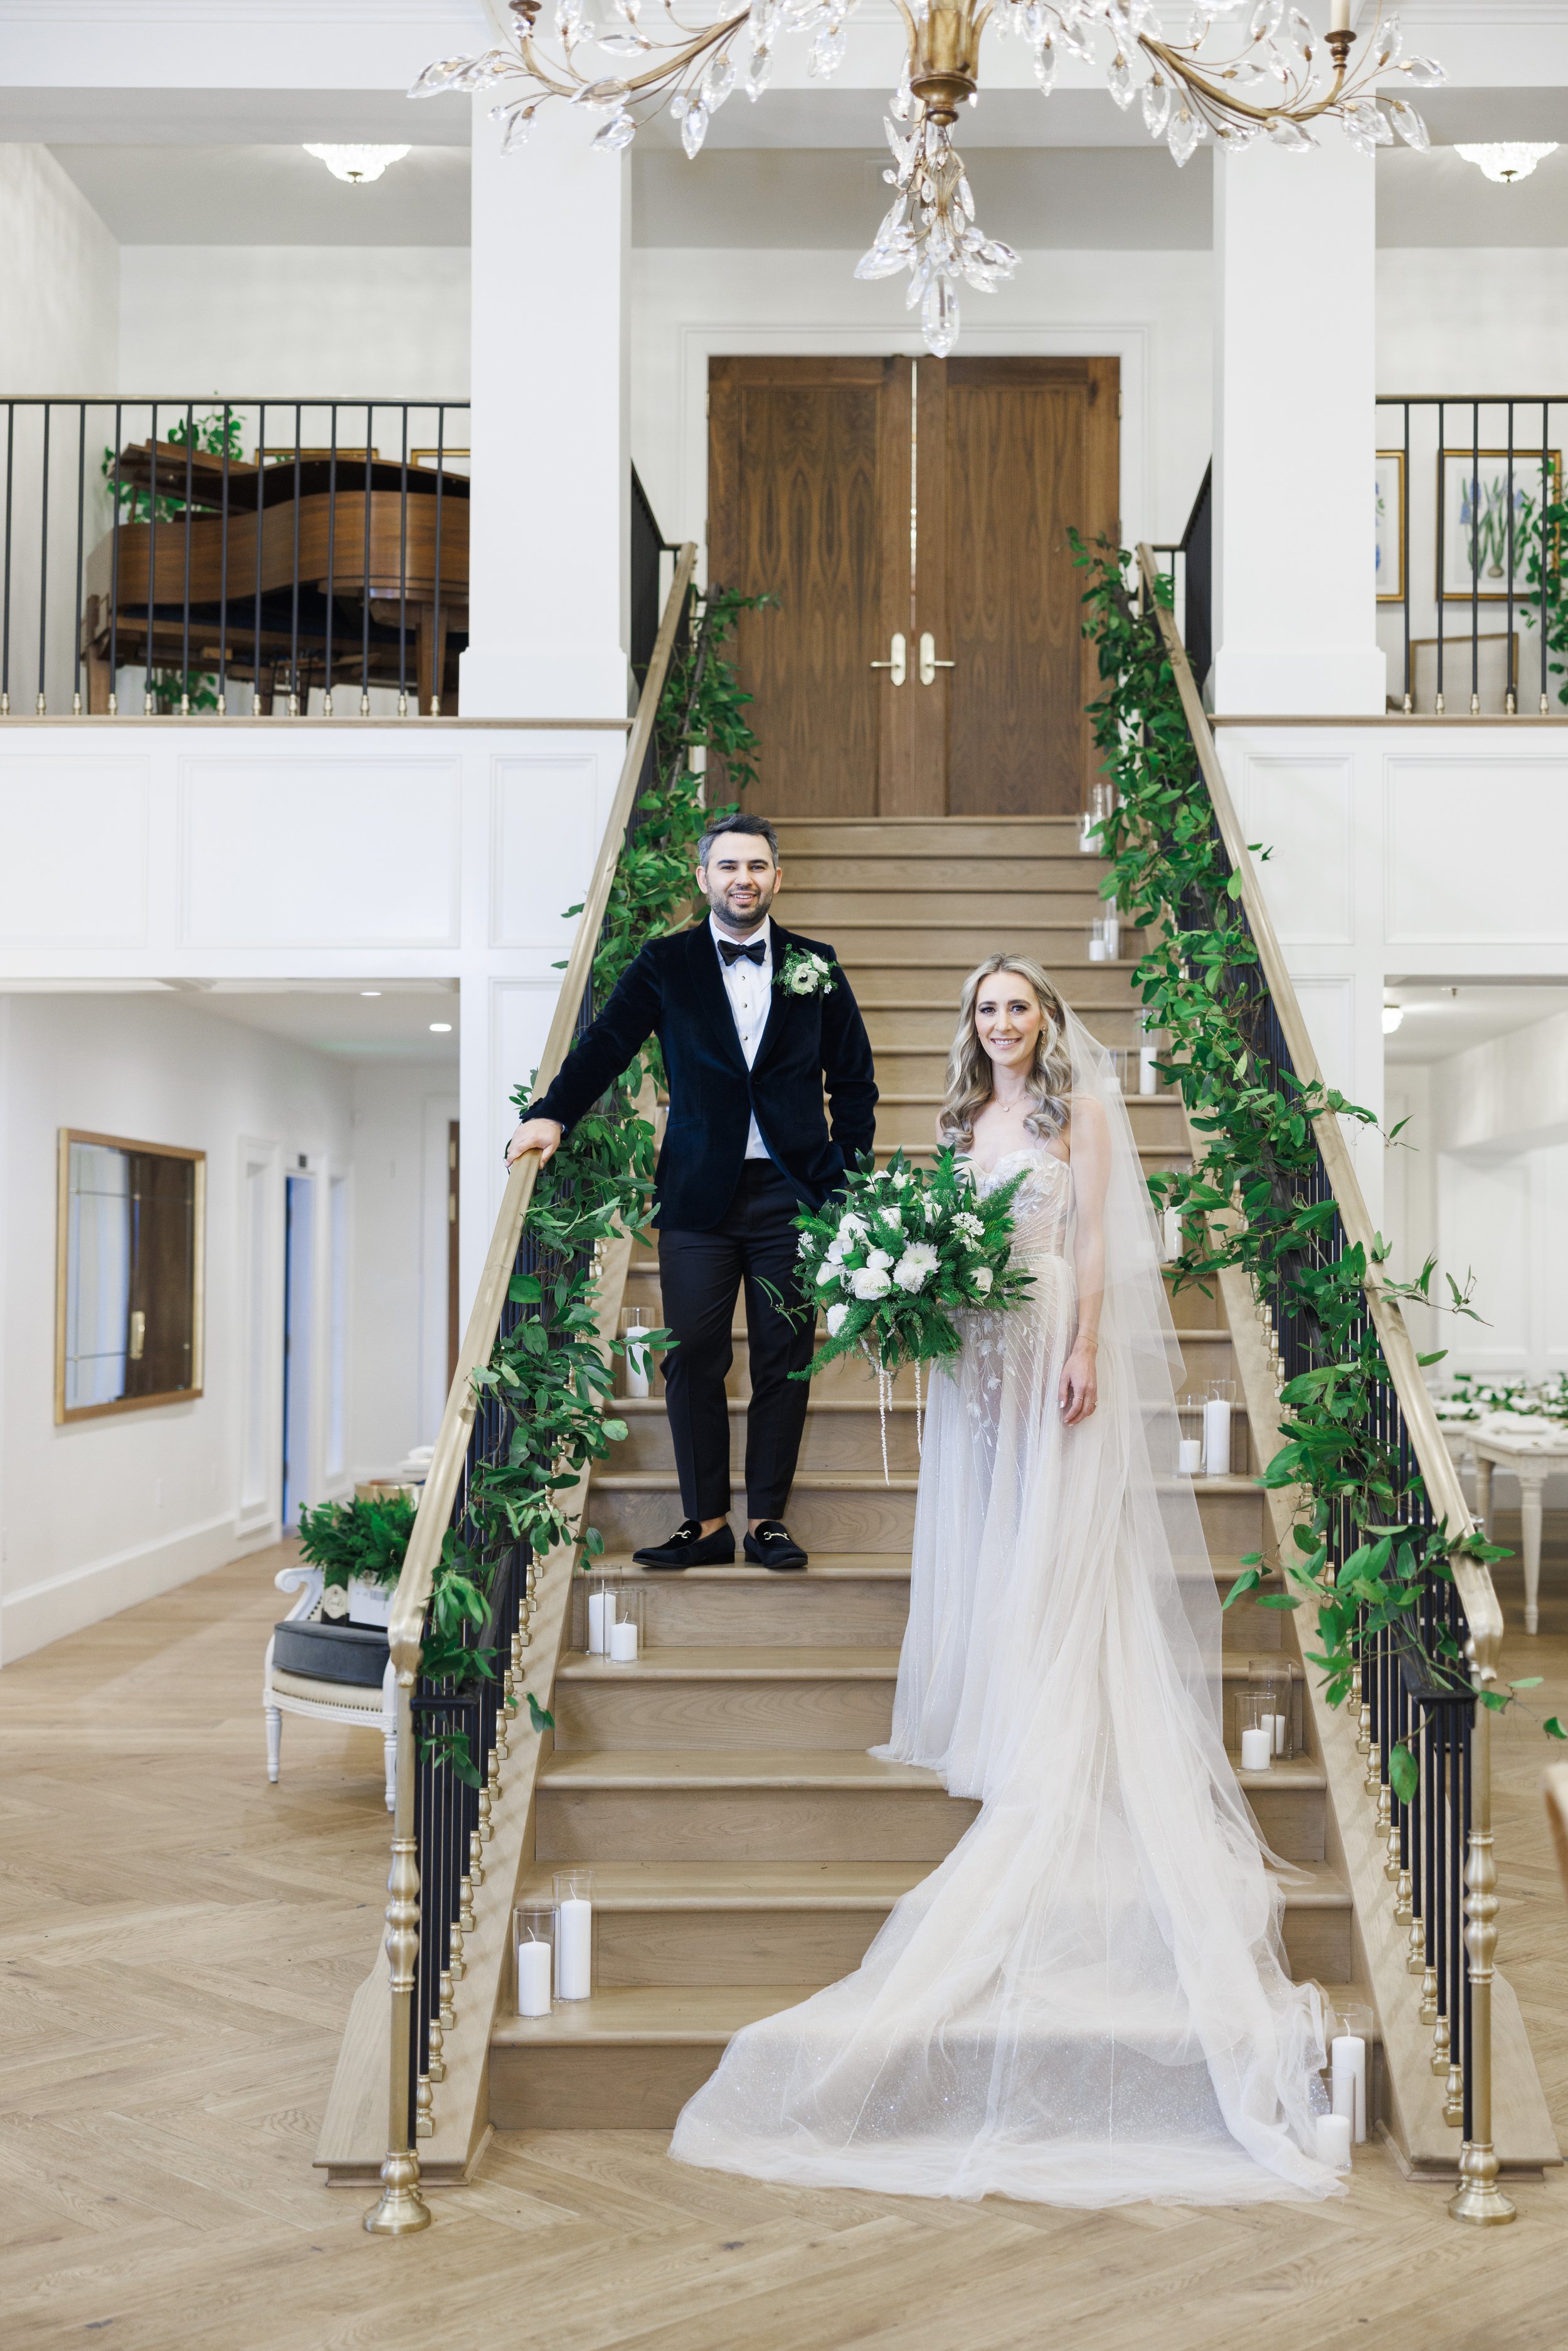  High-end wedding photographer captures a portrait of the newlyweds on event stairs by Savanna Richardson Photography. married #SavannaRichardsonPhotography #SavannaRichardsonWeddings #NYEwedding #magicalwedding #snowywedding #holidaywedding #married